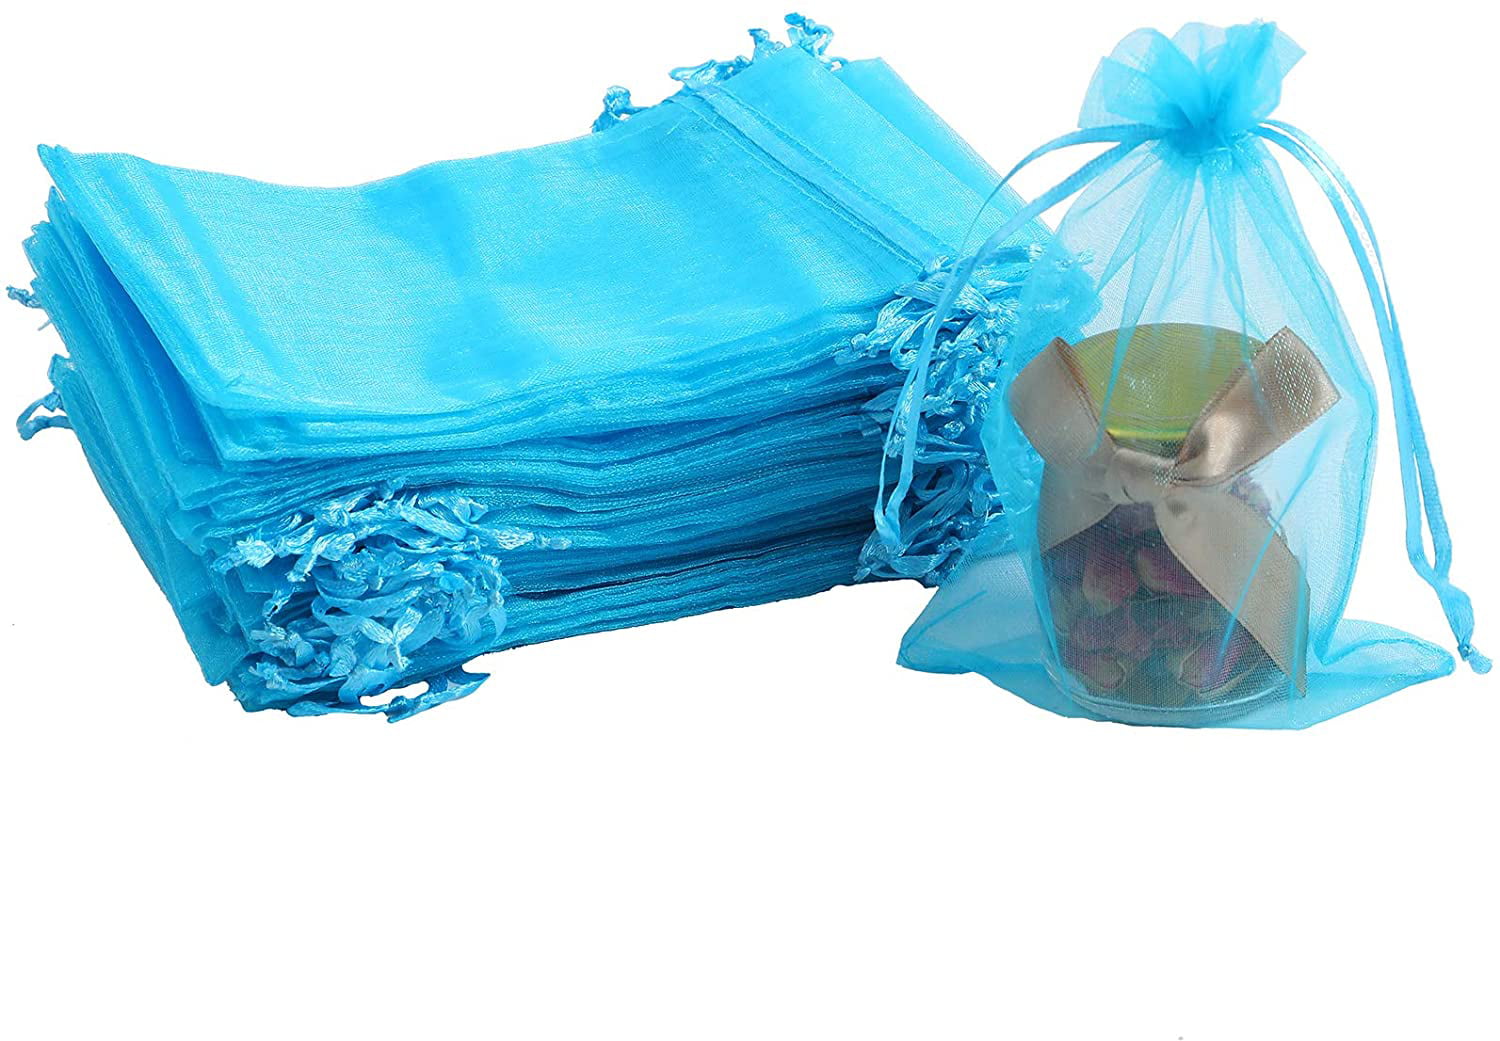 100X Sheer Organza Jewelry Pouch Candy Gift Packing Drawstring Bag Wedding Acc 